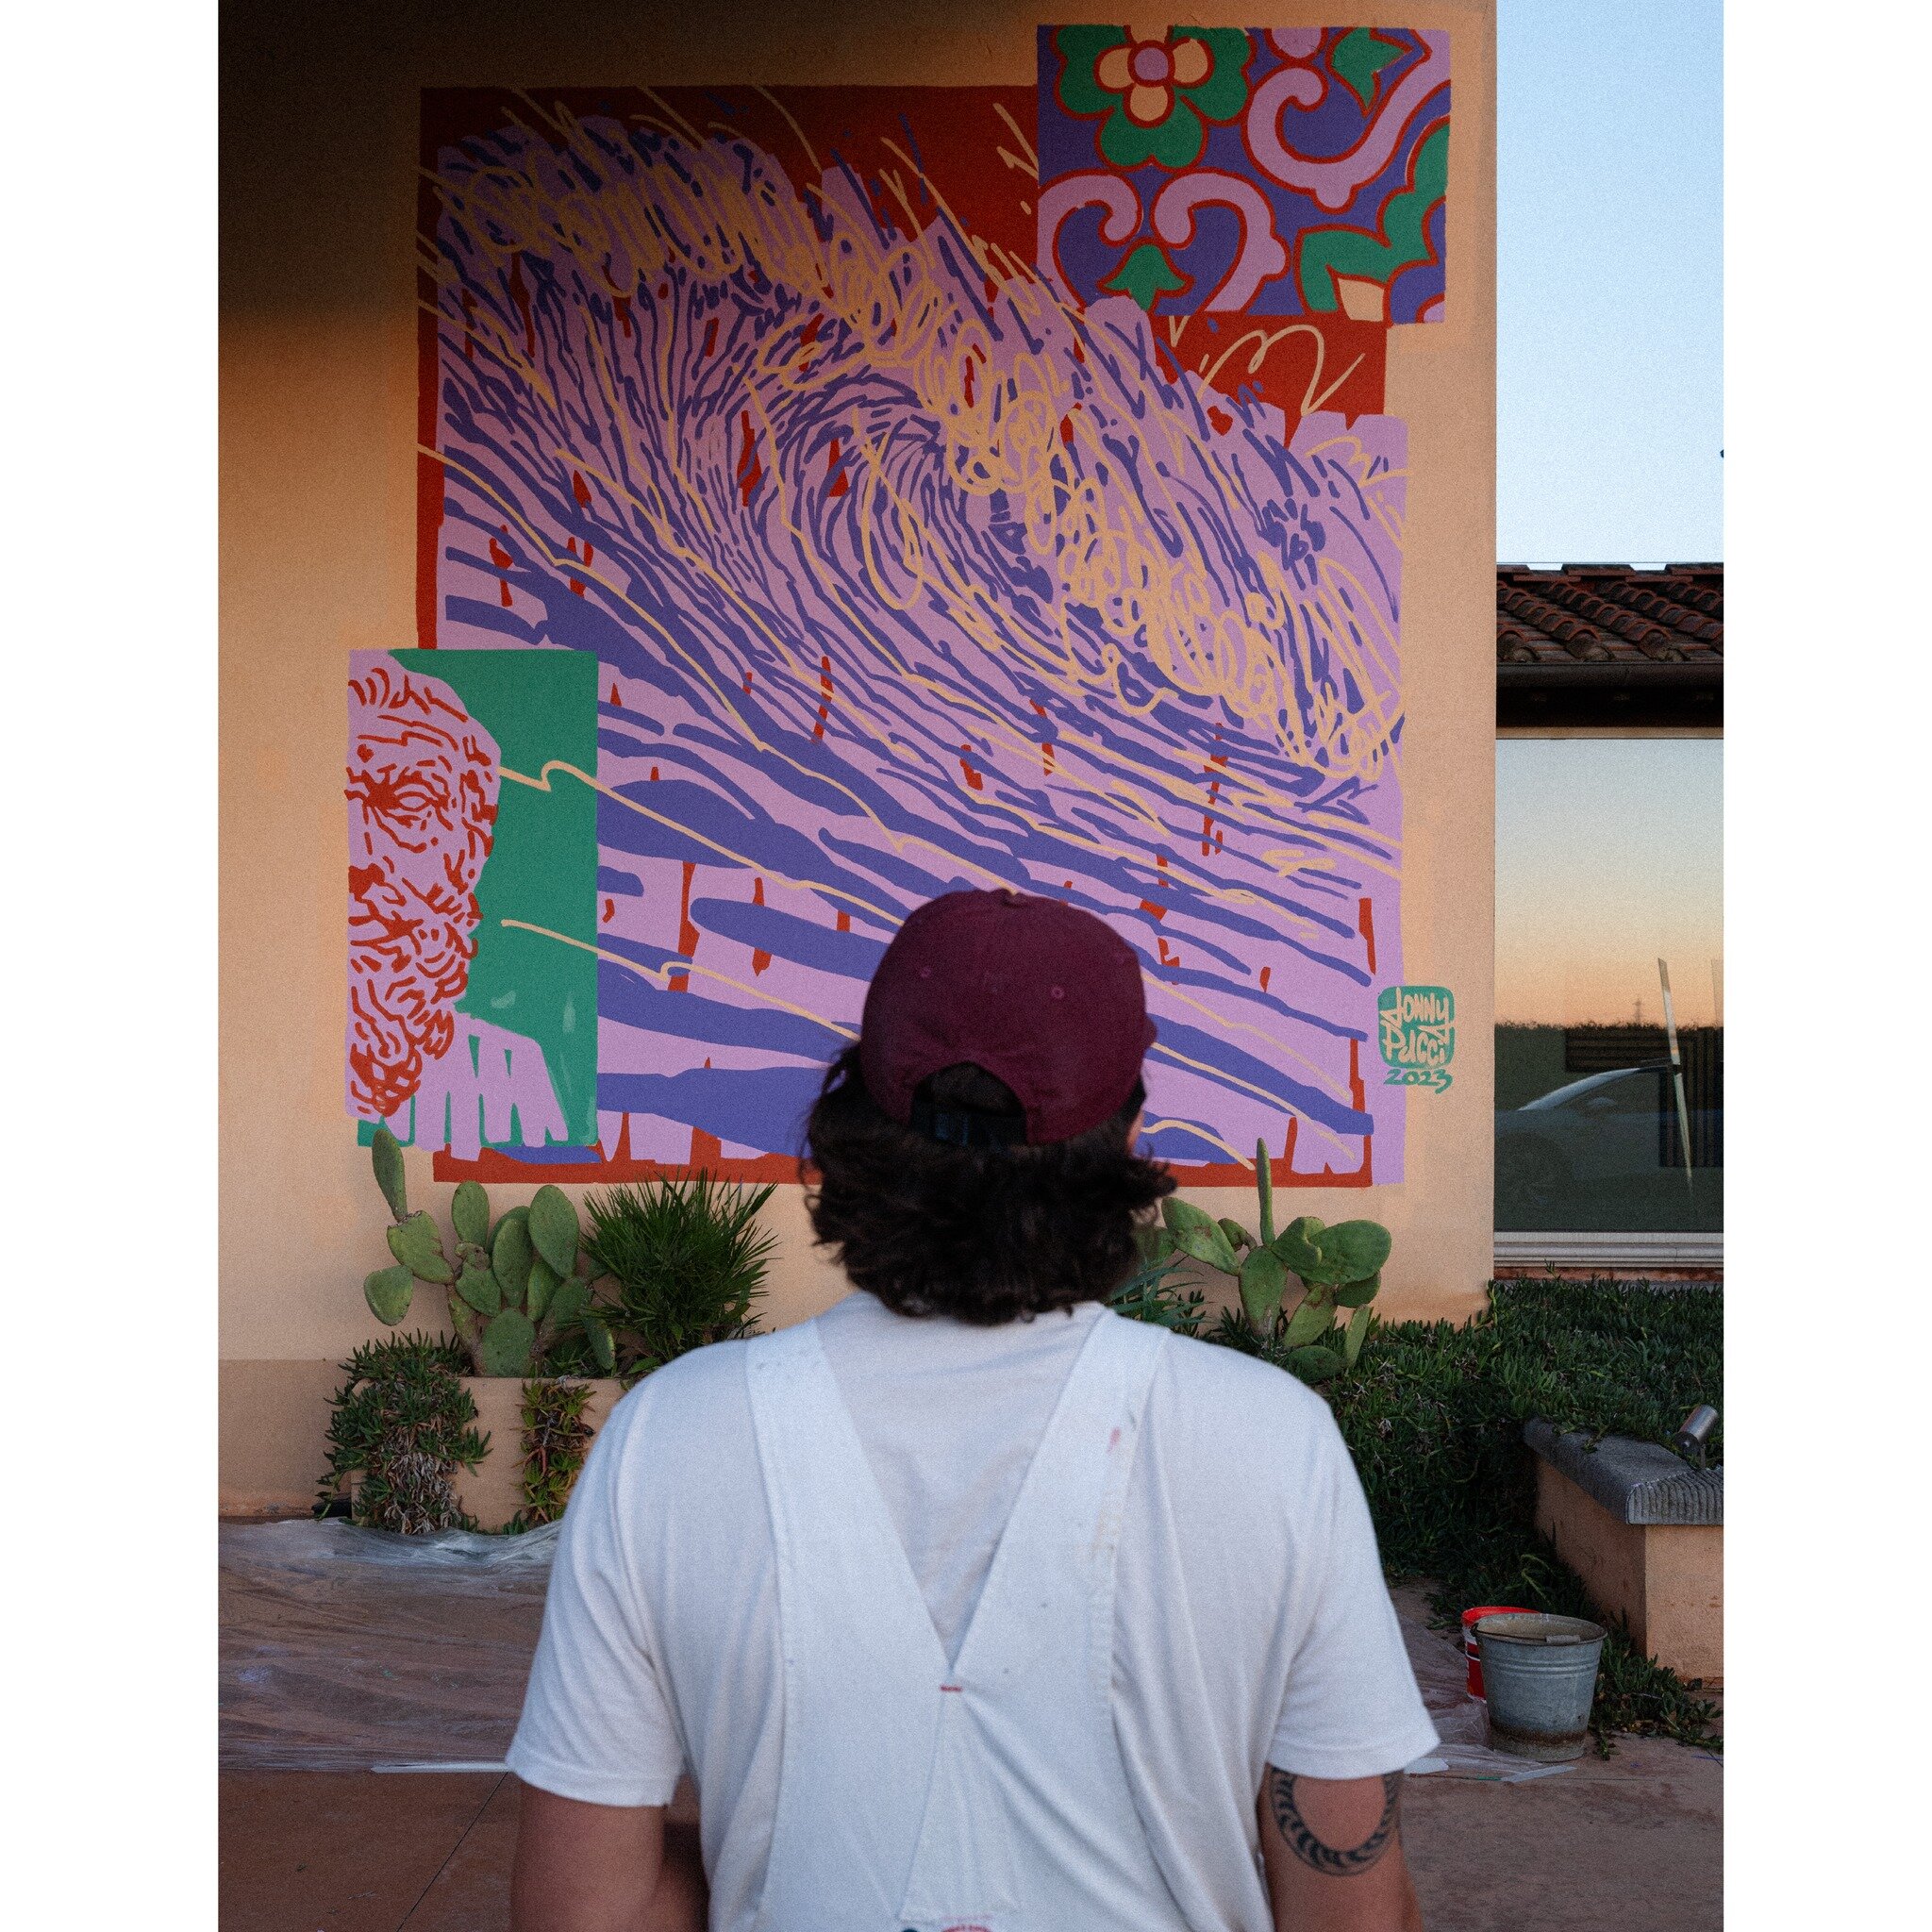 Inspired by the sights and colors of Tuscany and the Mediterranean. By exploring line, shape and color, one feels the power and the peace of this place and it&rsquo;s history.

&quot;Un'Onda Toscana&quot; mural by @jonnypucci 

. #materiaprima #mater